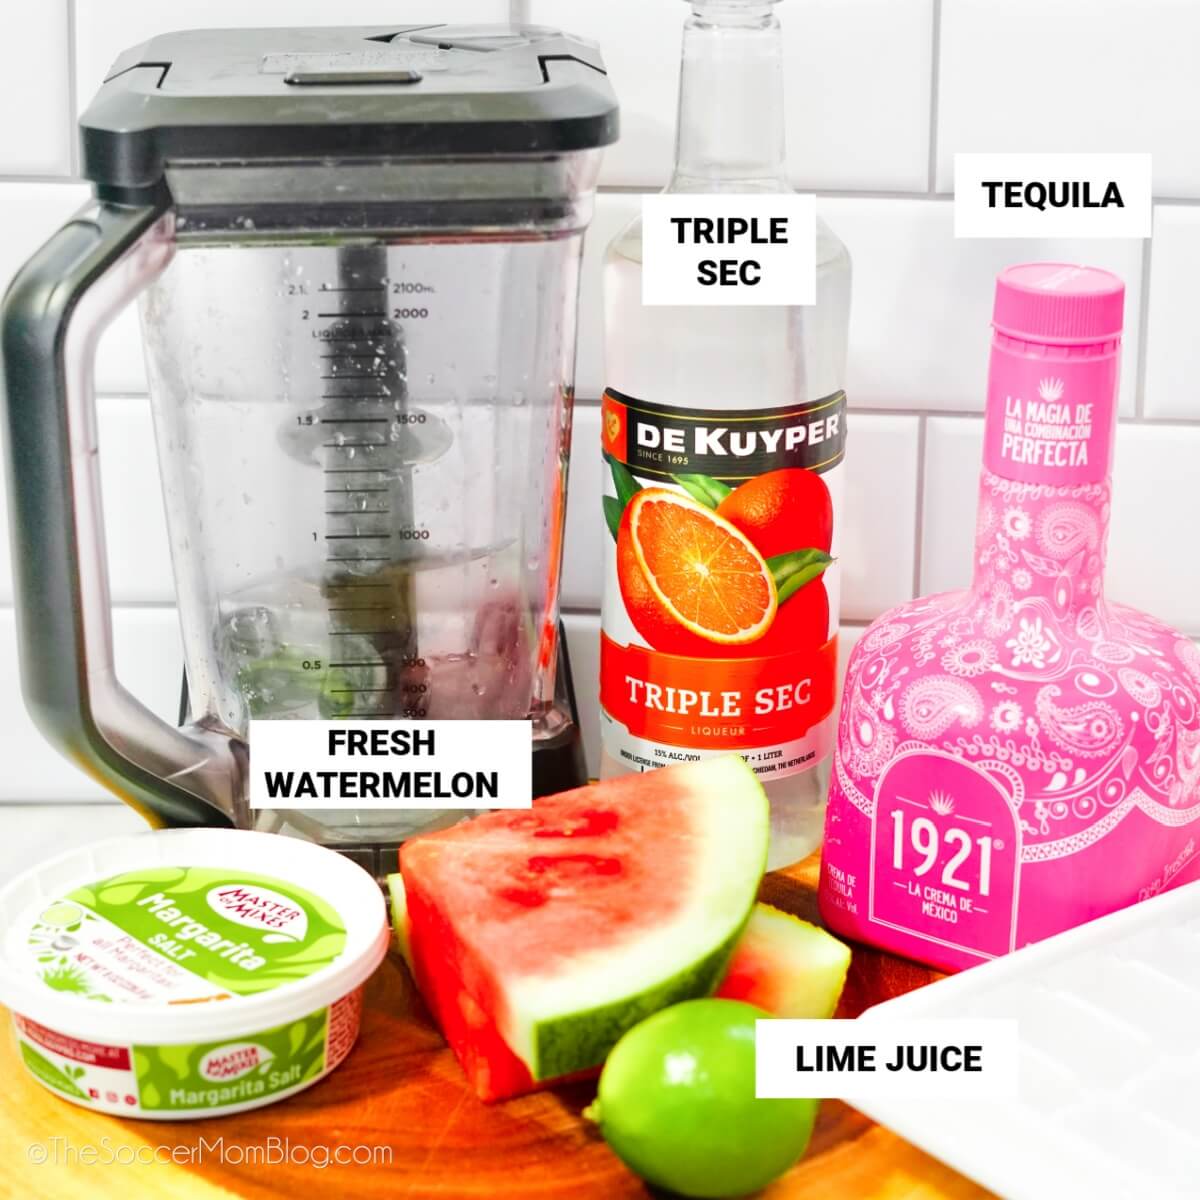 watermelon margarita ingredients, with text labels: fresh watermelon, triple sec, ,tequila, lime juice